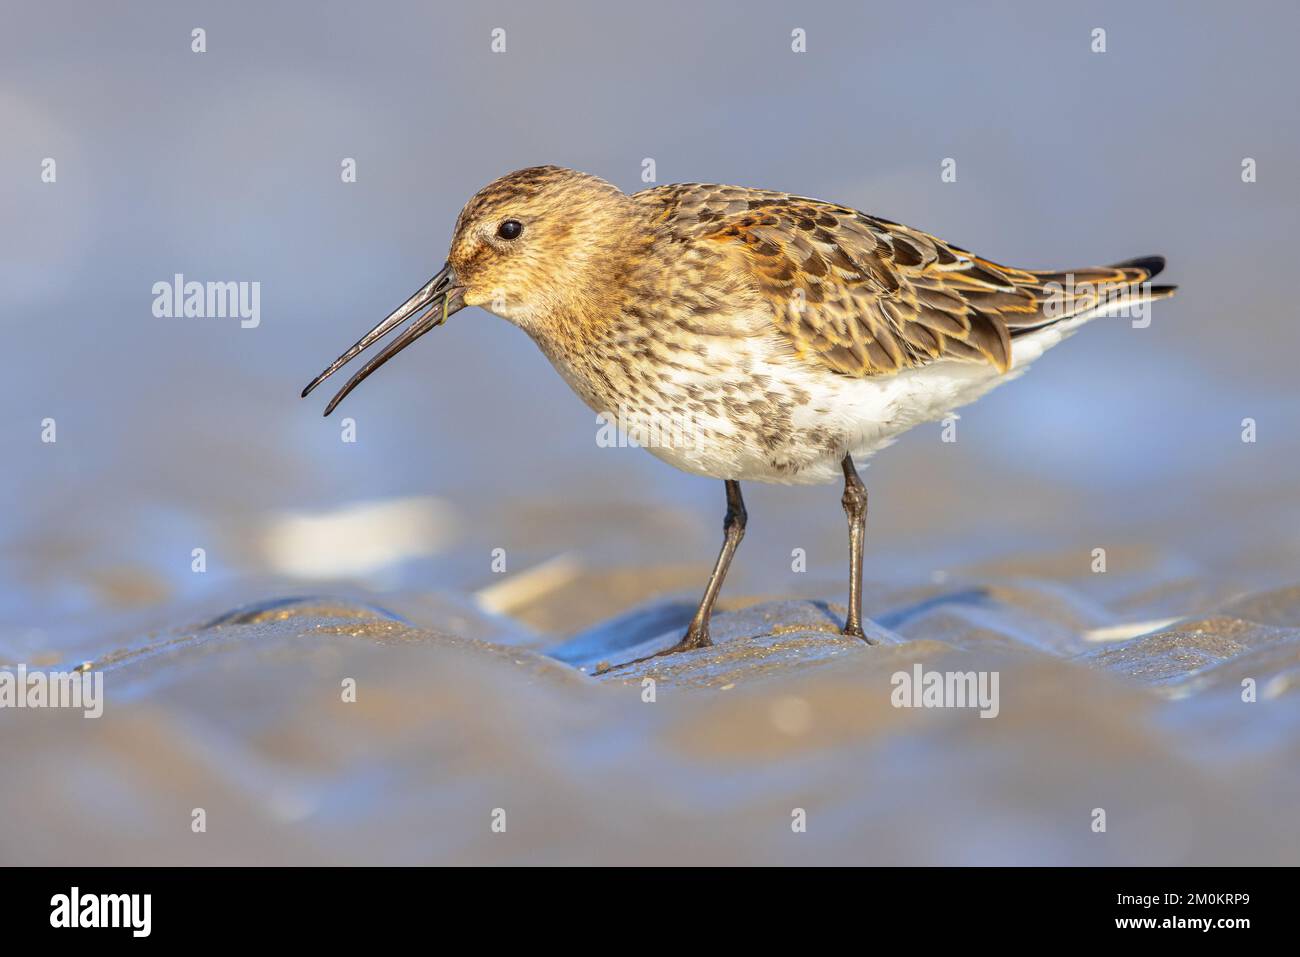 Dunlin (Calidris alpina) small wader bird foraging on a beach during migration. IJmuiden Netherlands. Wildlife scene of nature in Europe. Stock Photo